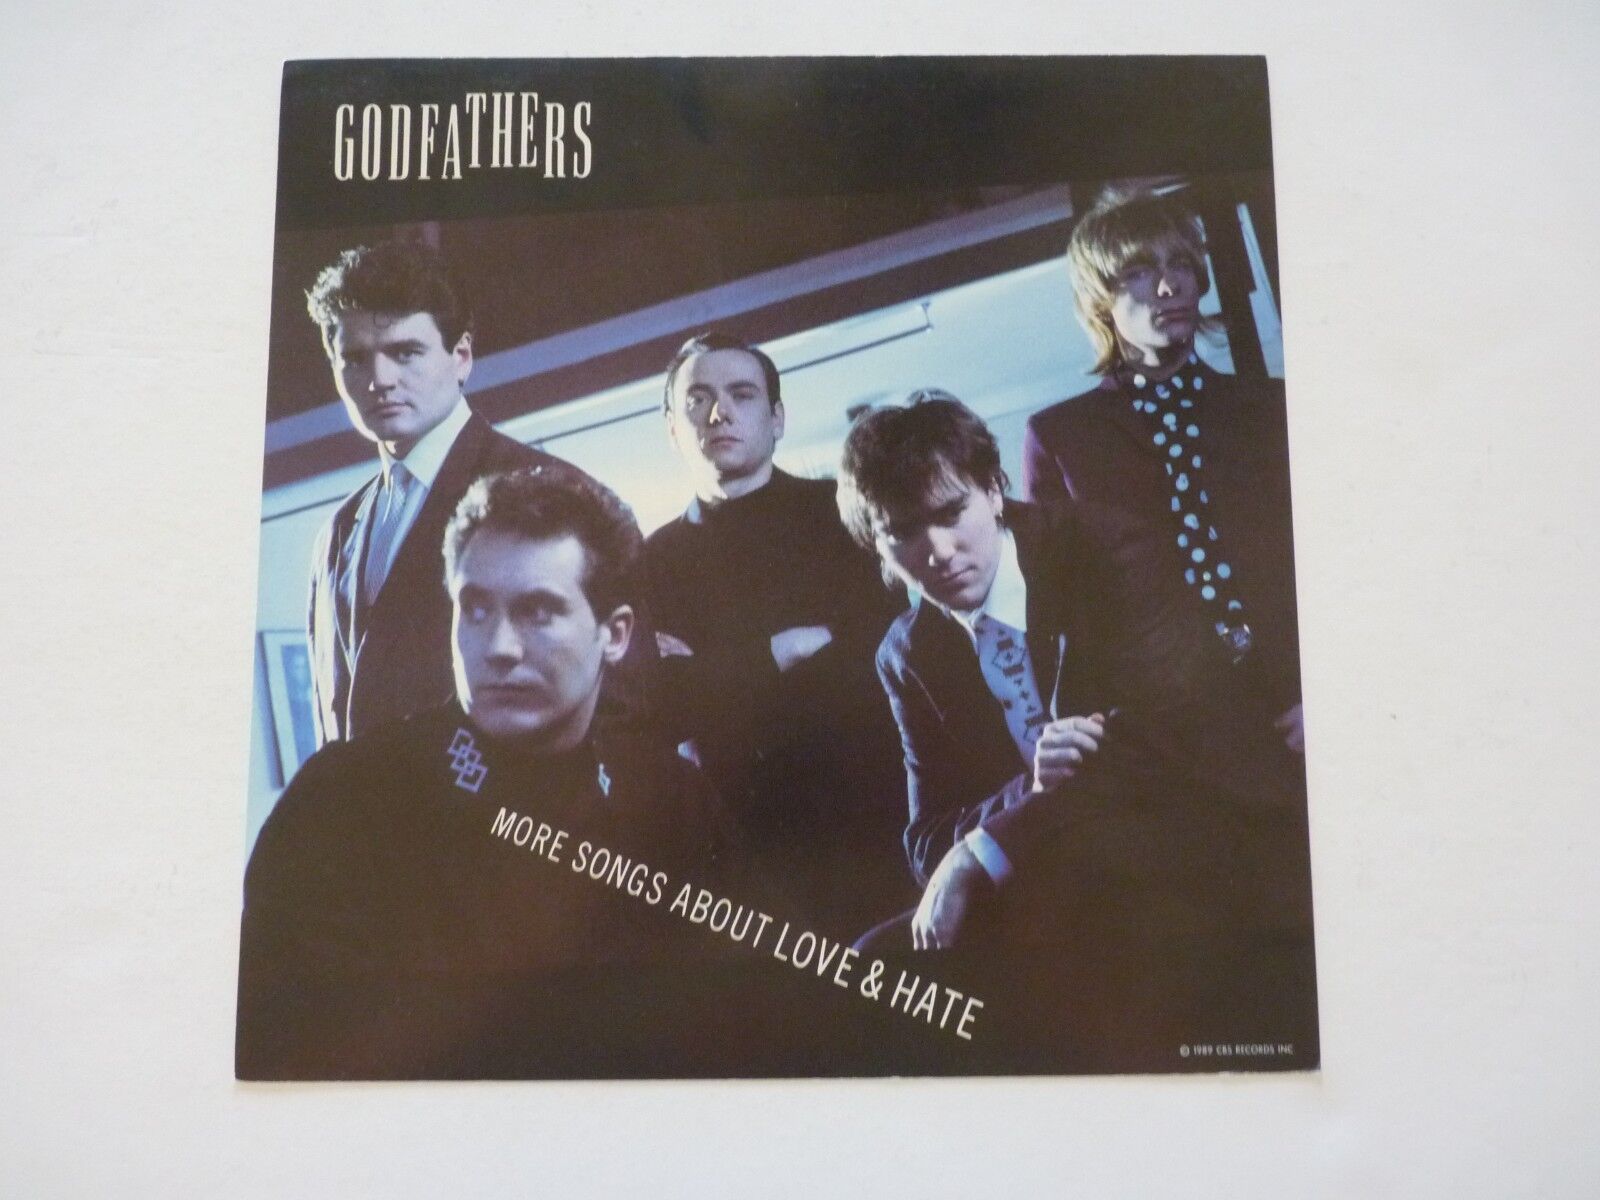 Godfathers Songs About Love & Hate 1989 Promo LP Record Photo Poster painting Flat 12x12 Poster